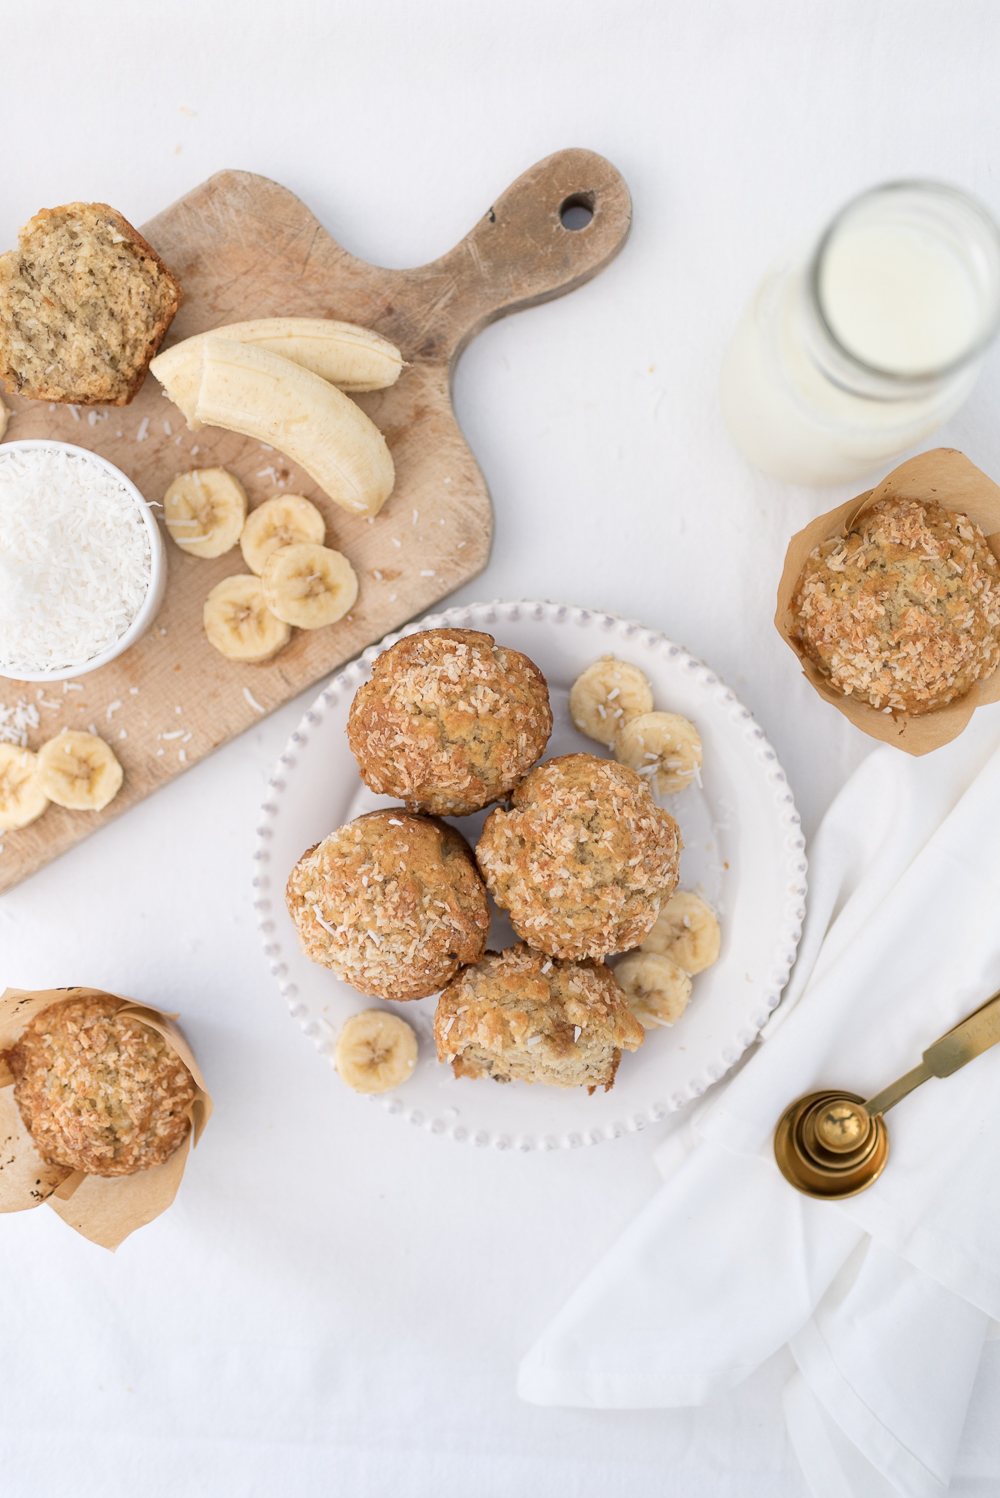 This simple banana coconut muffin recipe is perfect for breakfast on busy mornings or makes a delicious afternoon snack.